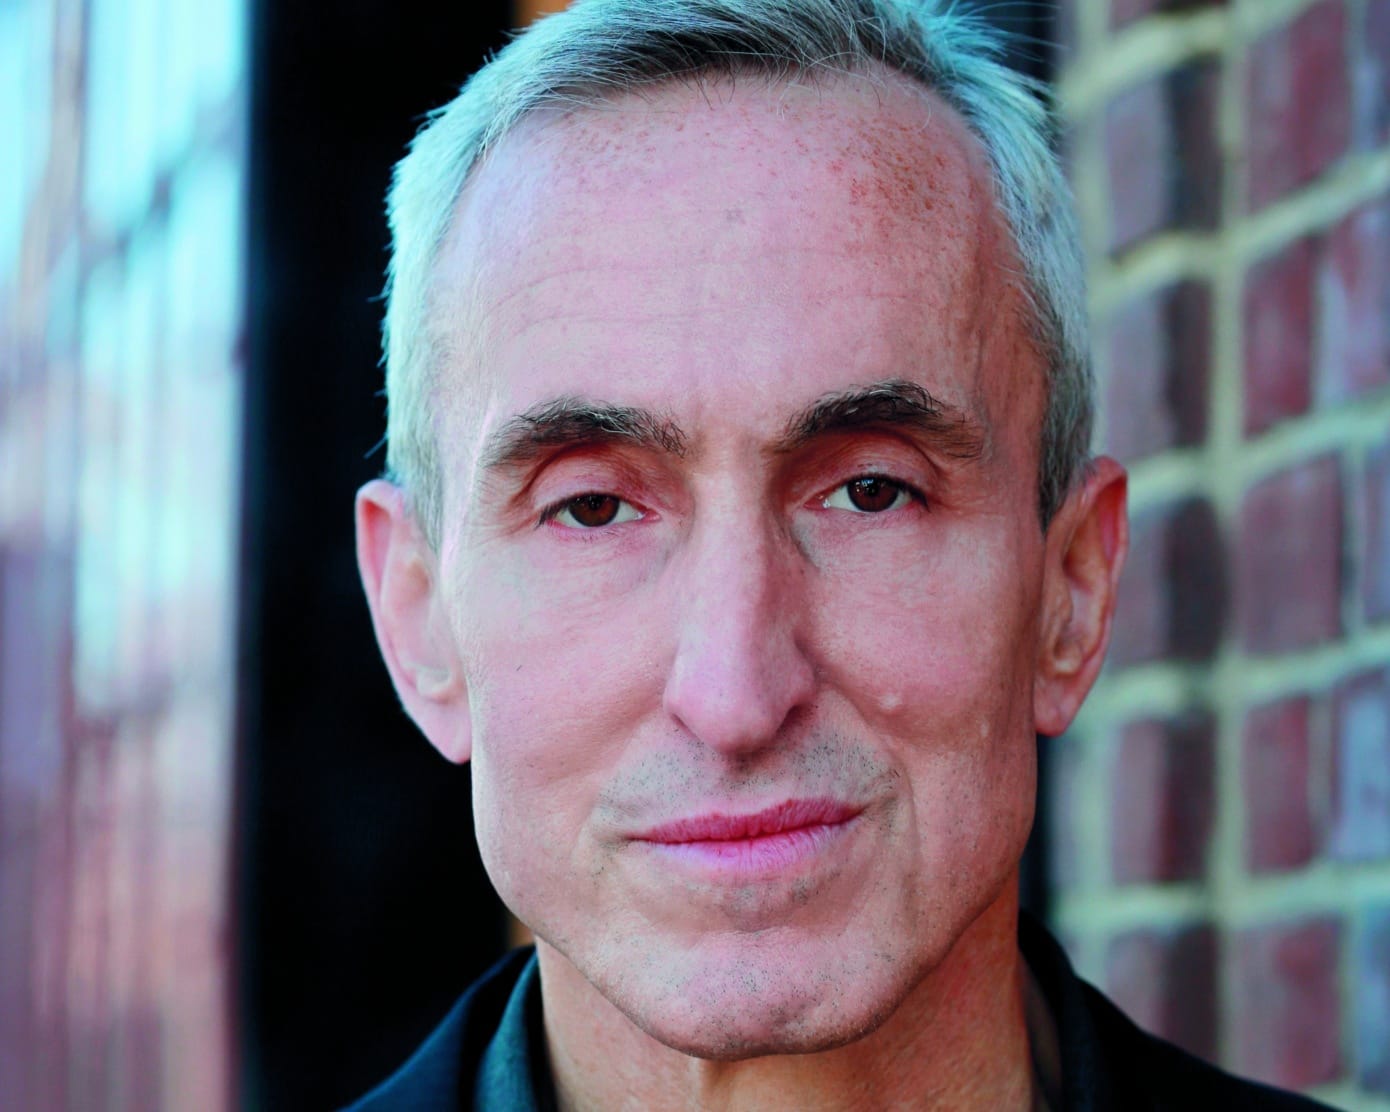 New “Eat More Fat” Infographic: Gary Taubes’ “Why We Get Fat” in a Nutshell